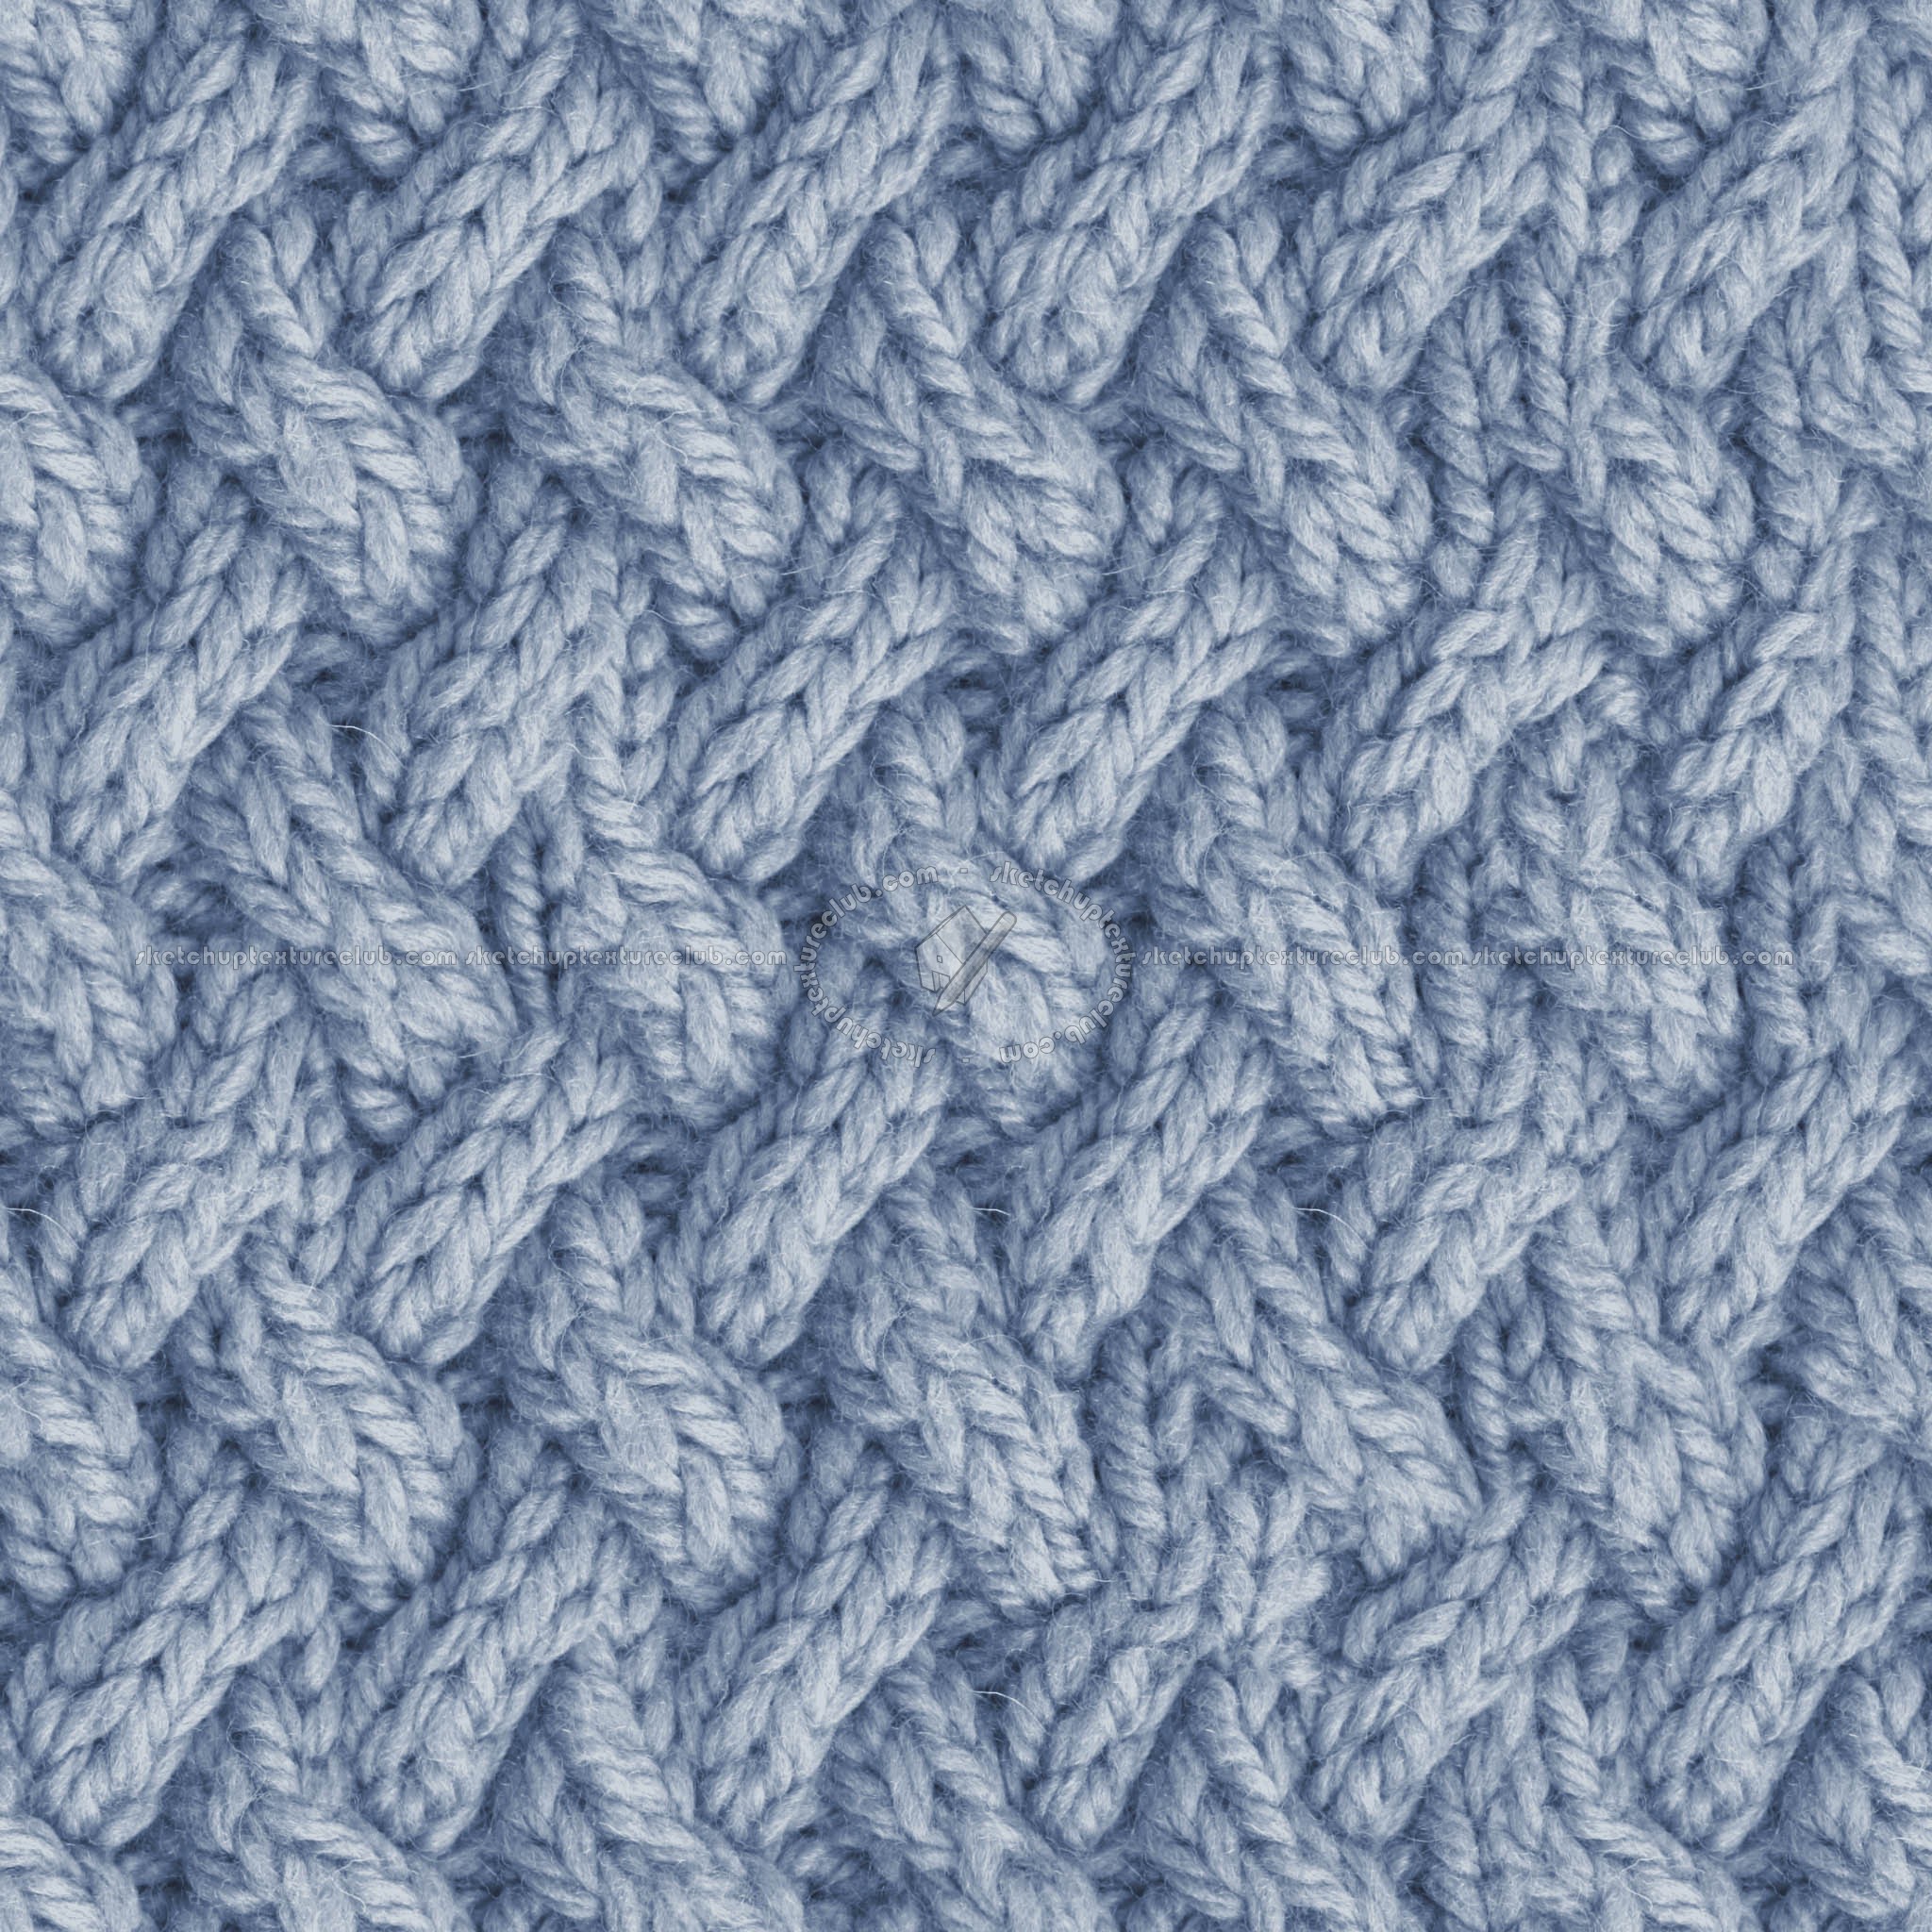 wool knitted PBR texture seamless 21796